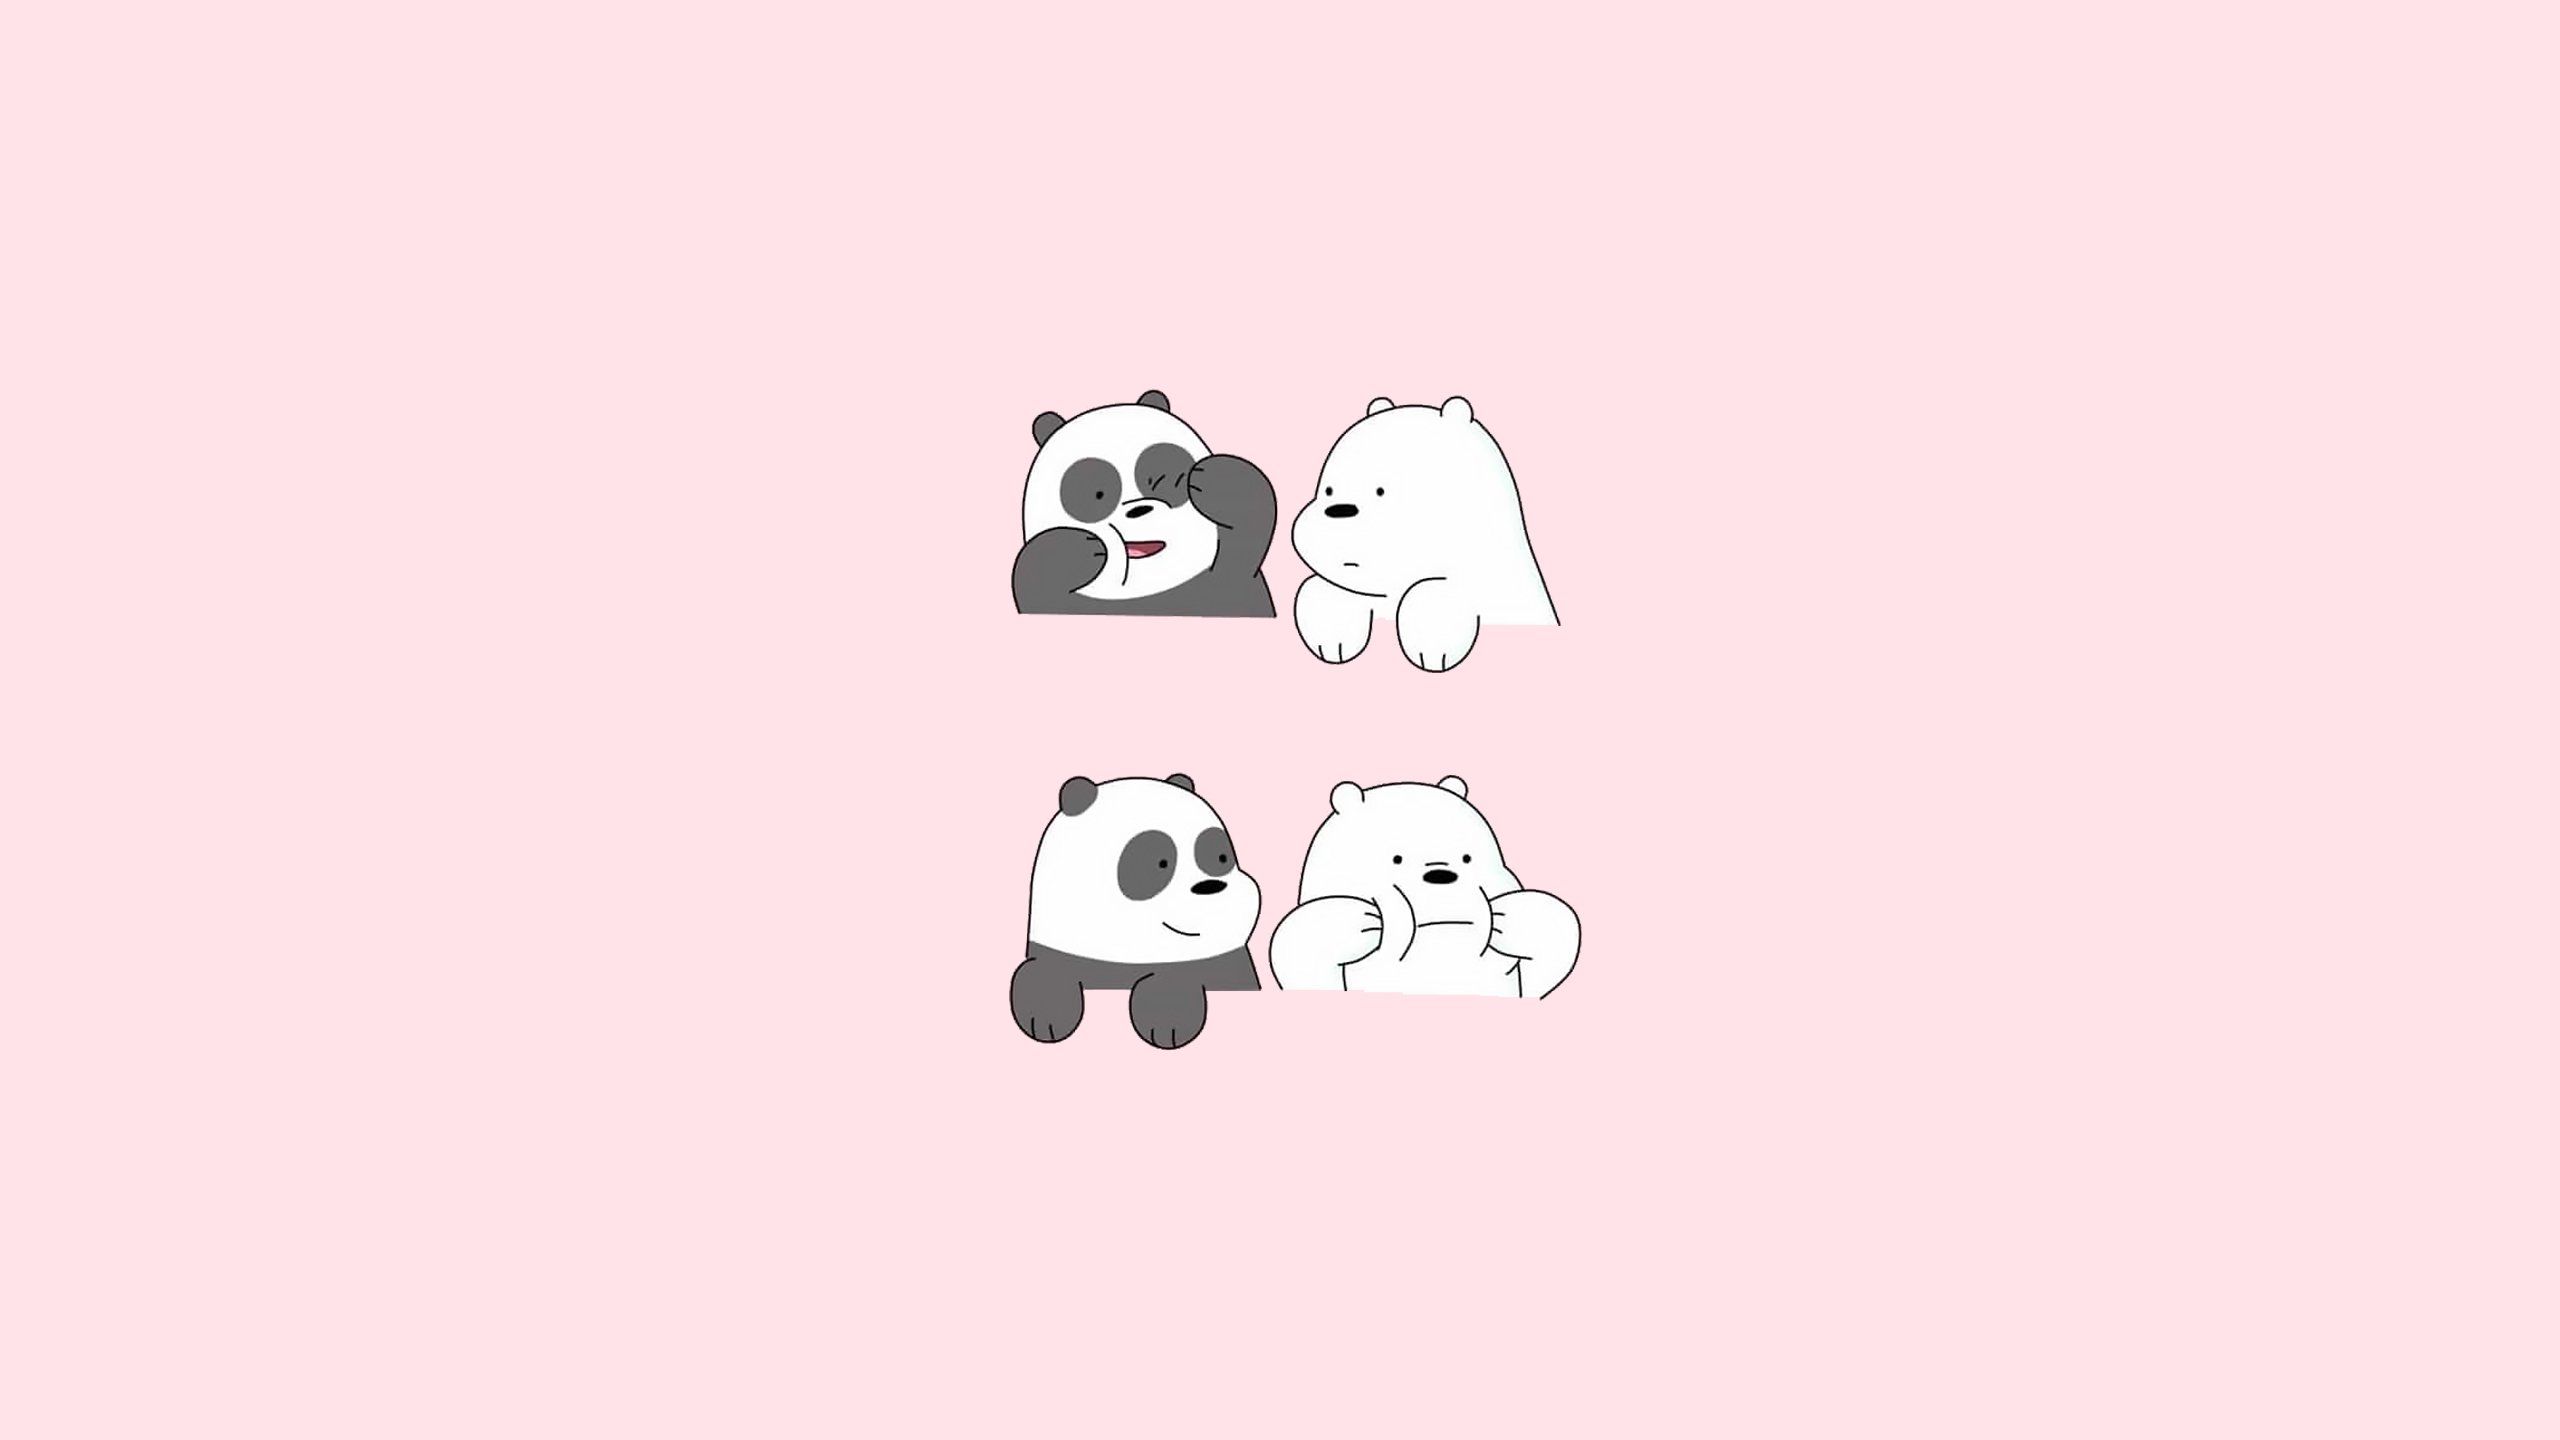 We bare bears, Ice bear, Panda, Grizzly, Wallpaper, Background - We Bare Bears